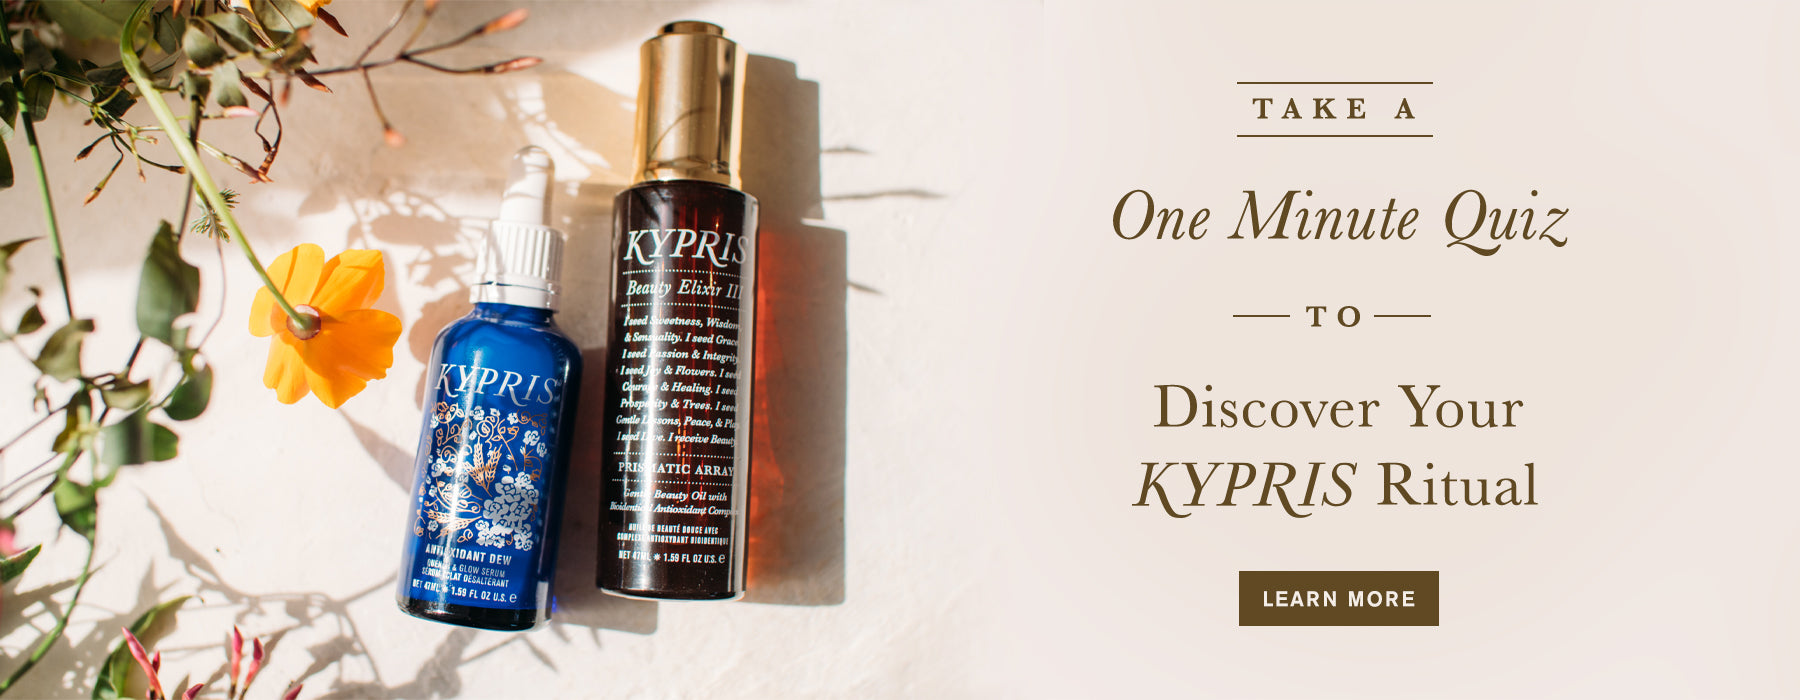 Take a One Minute Quiz to Discover Your KYPRIS Ritual